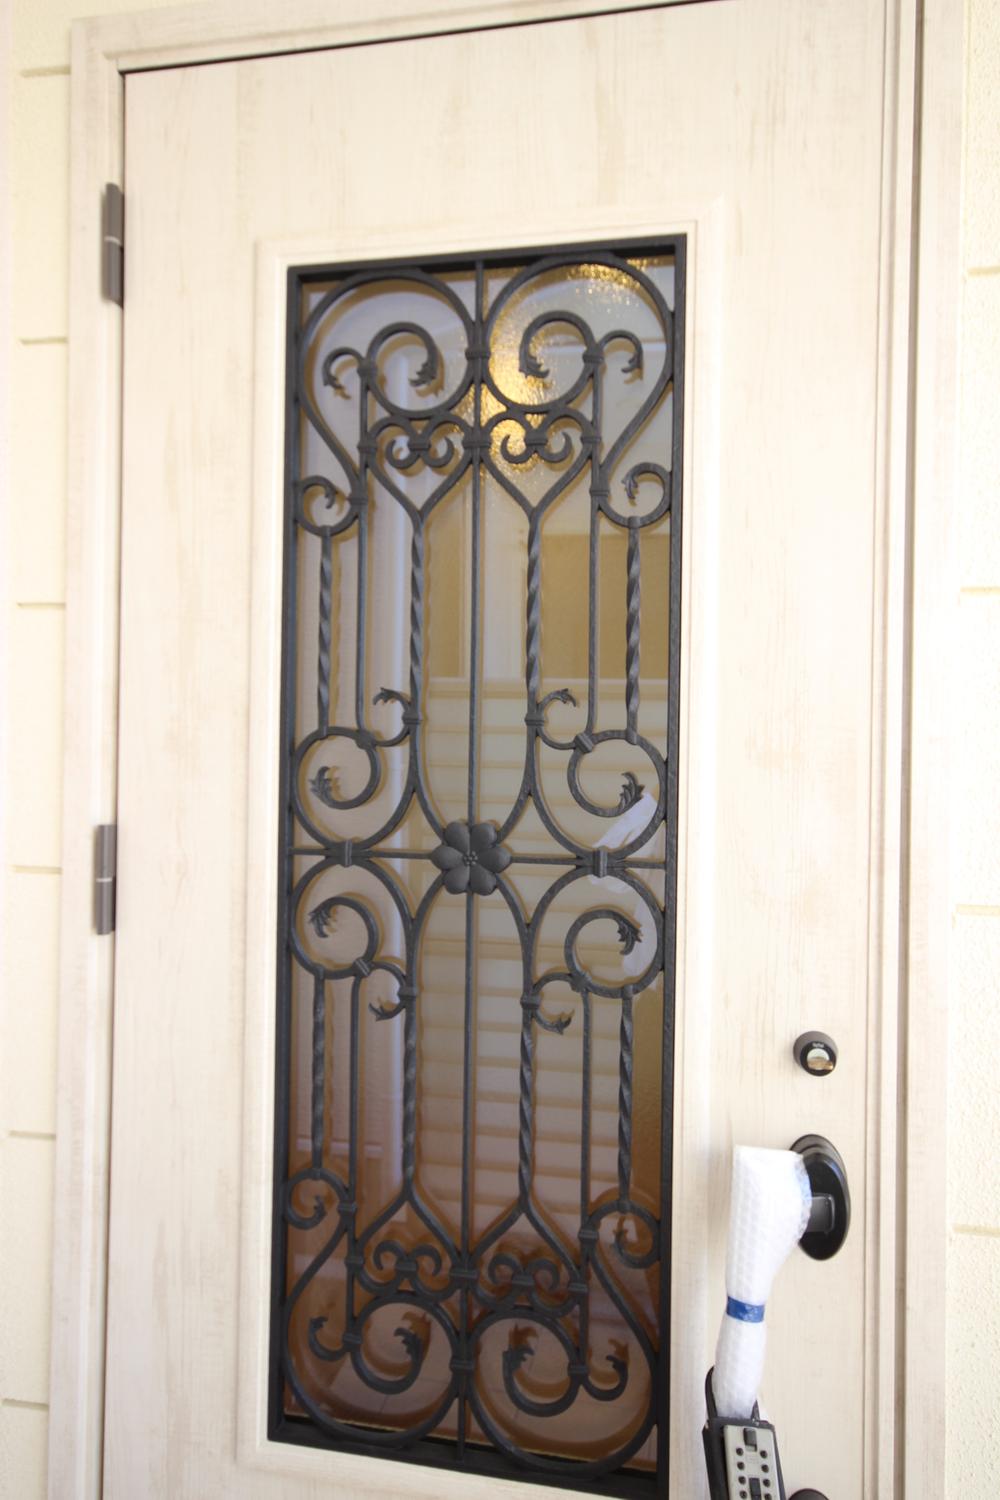 Local appearance photo. Entrance door of the metal fittings of fancy casting. Watermark glass is also an accent. 